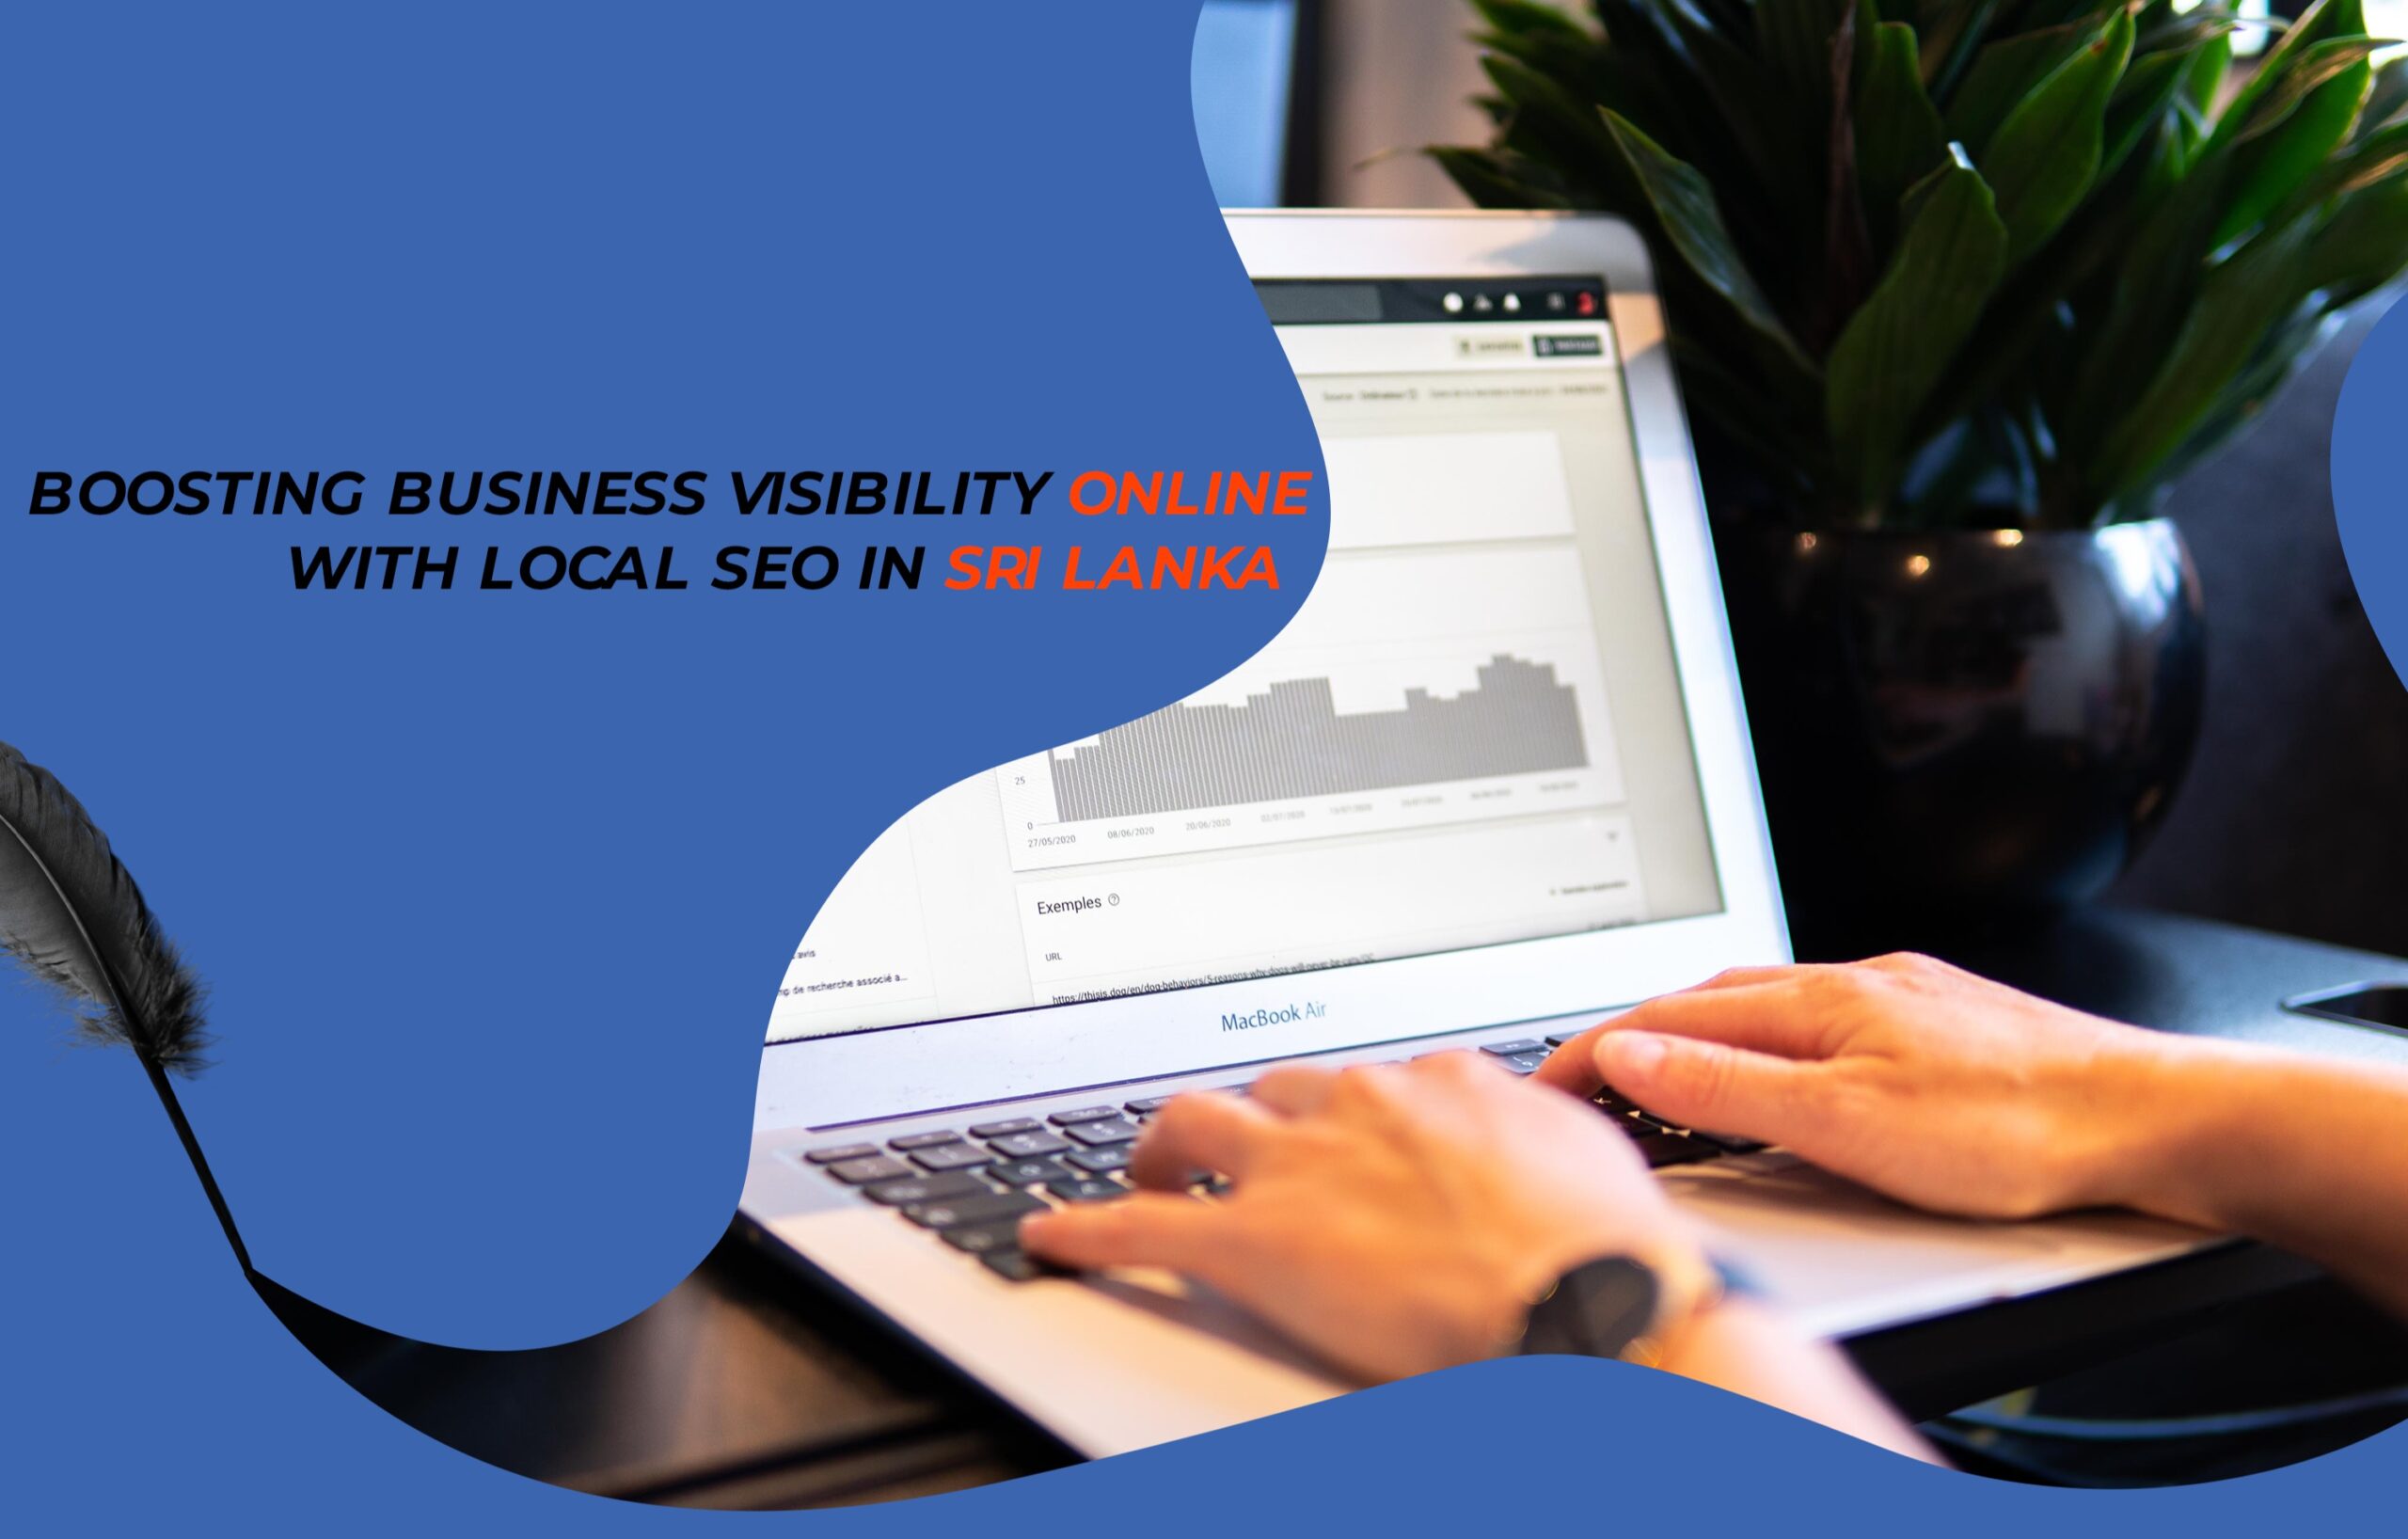 Boosting Business Visibility Online with Local SEO in Sri Lanka